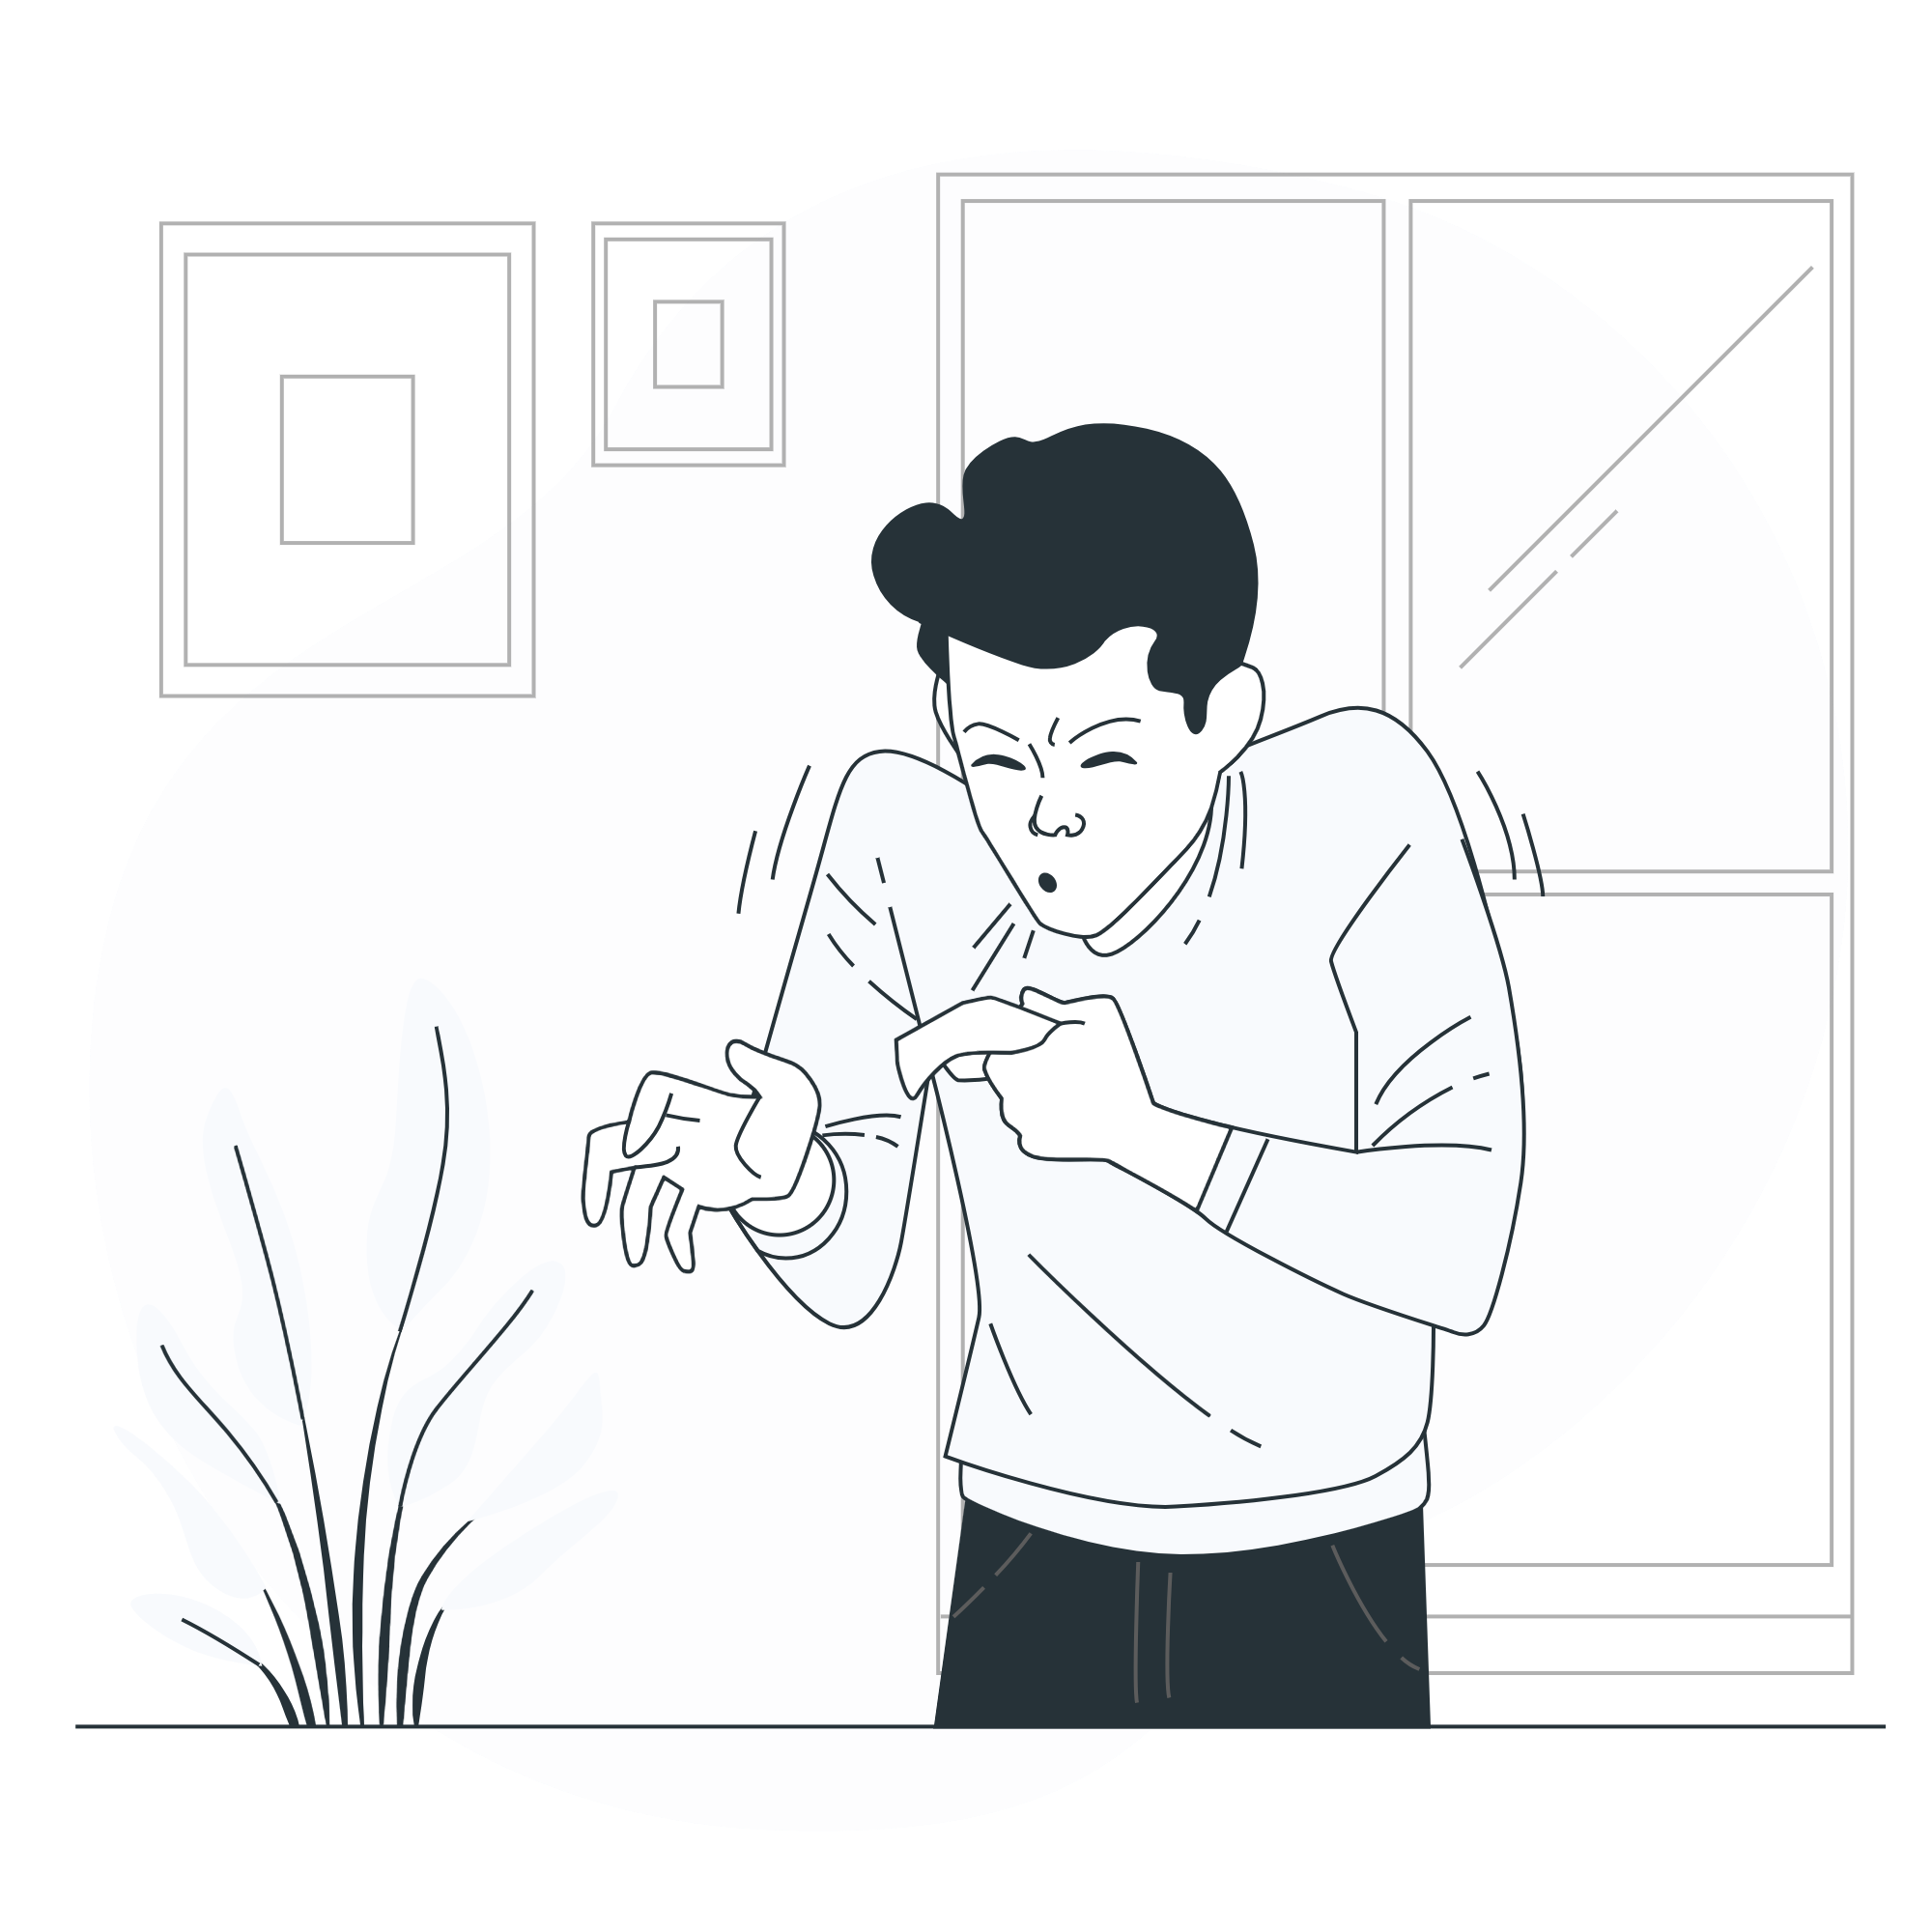 Image depicting sensory impairment: A person using tactile sign language with hands, showcasing communication methods and inclusivity for sensory challenges.